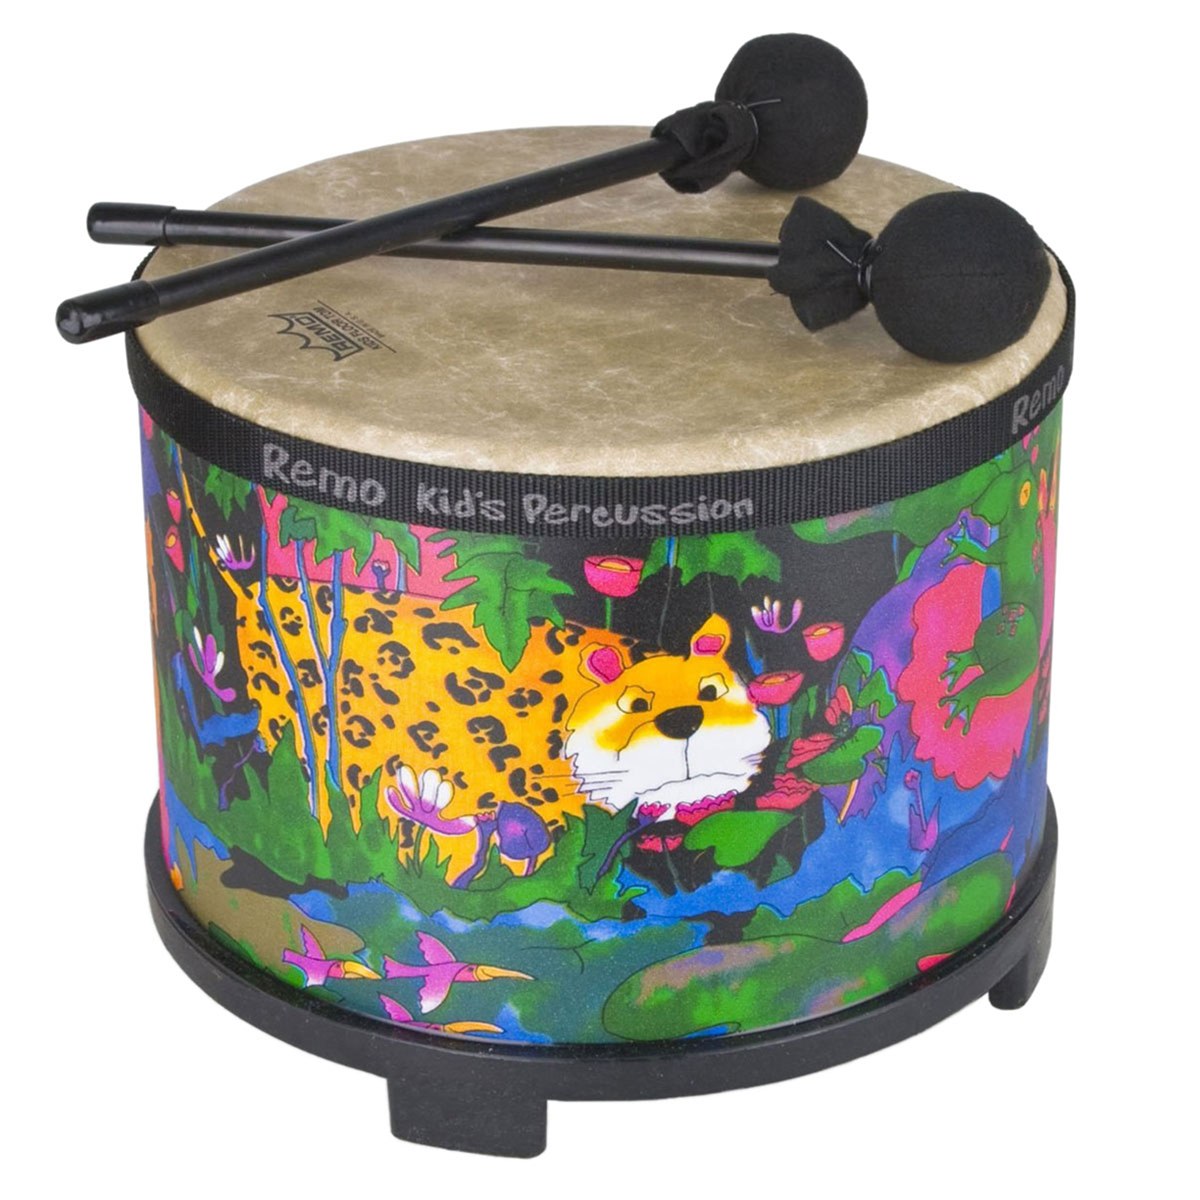 Remo Kids Percussion® Floor Tom Drum Comfort Sound Technology® Rain Forest, 10" - image 2 of 3